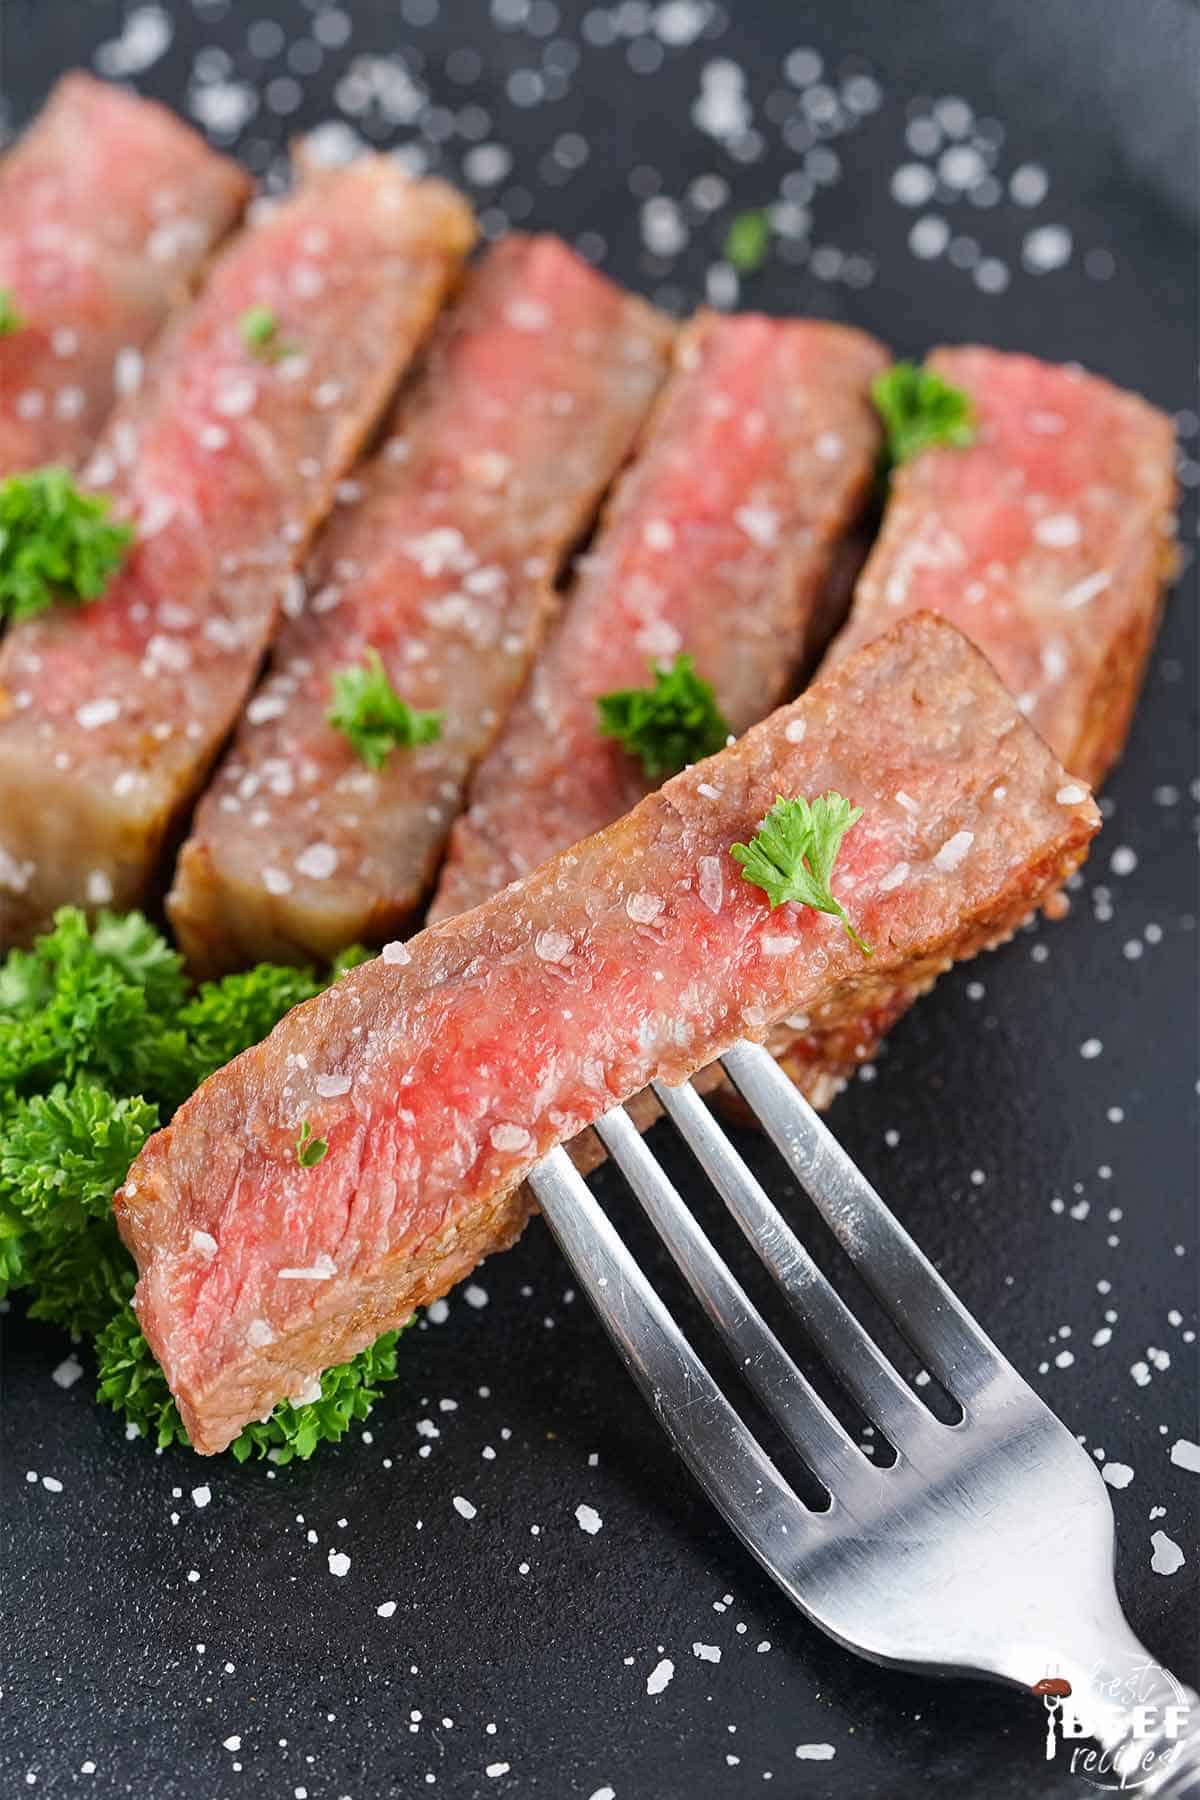 slices of wagyu steak with a fork